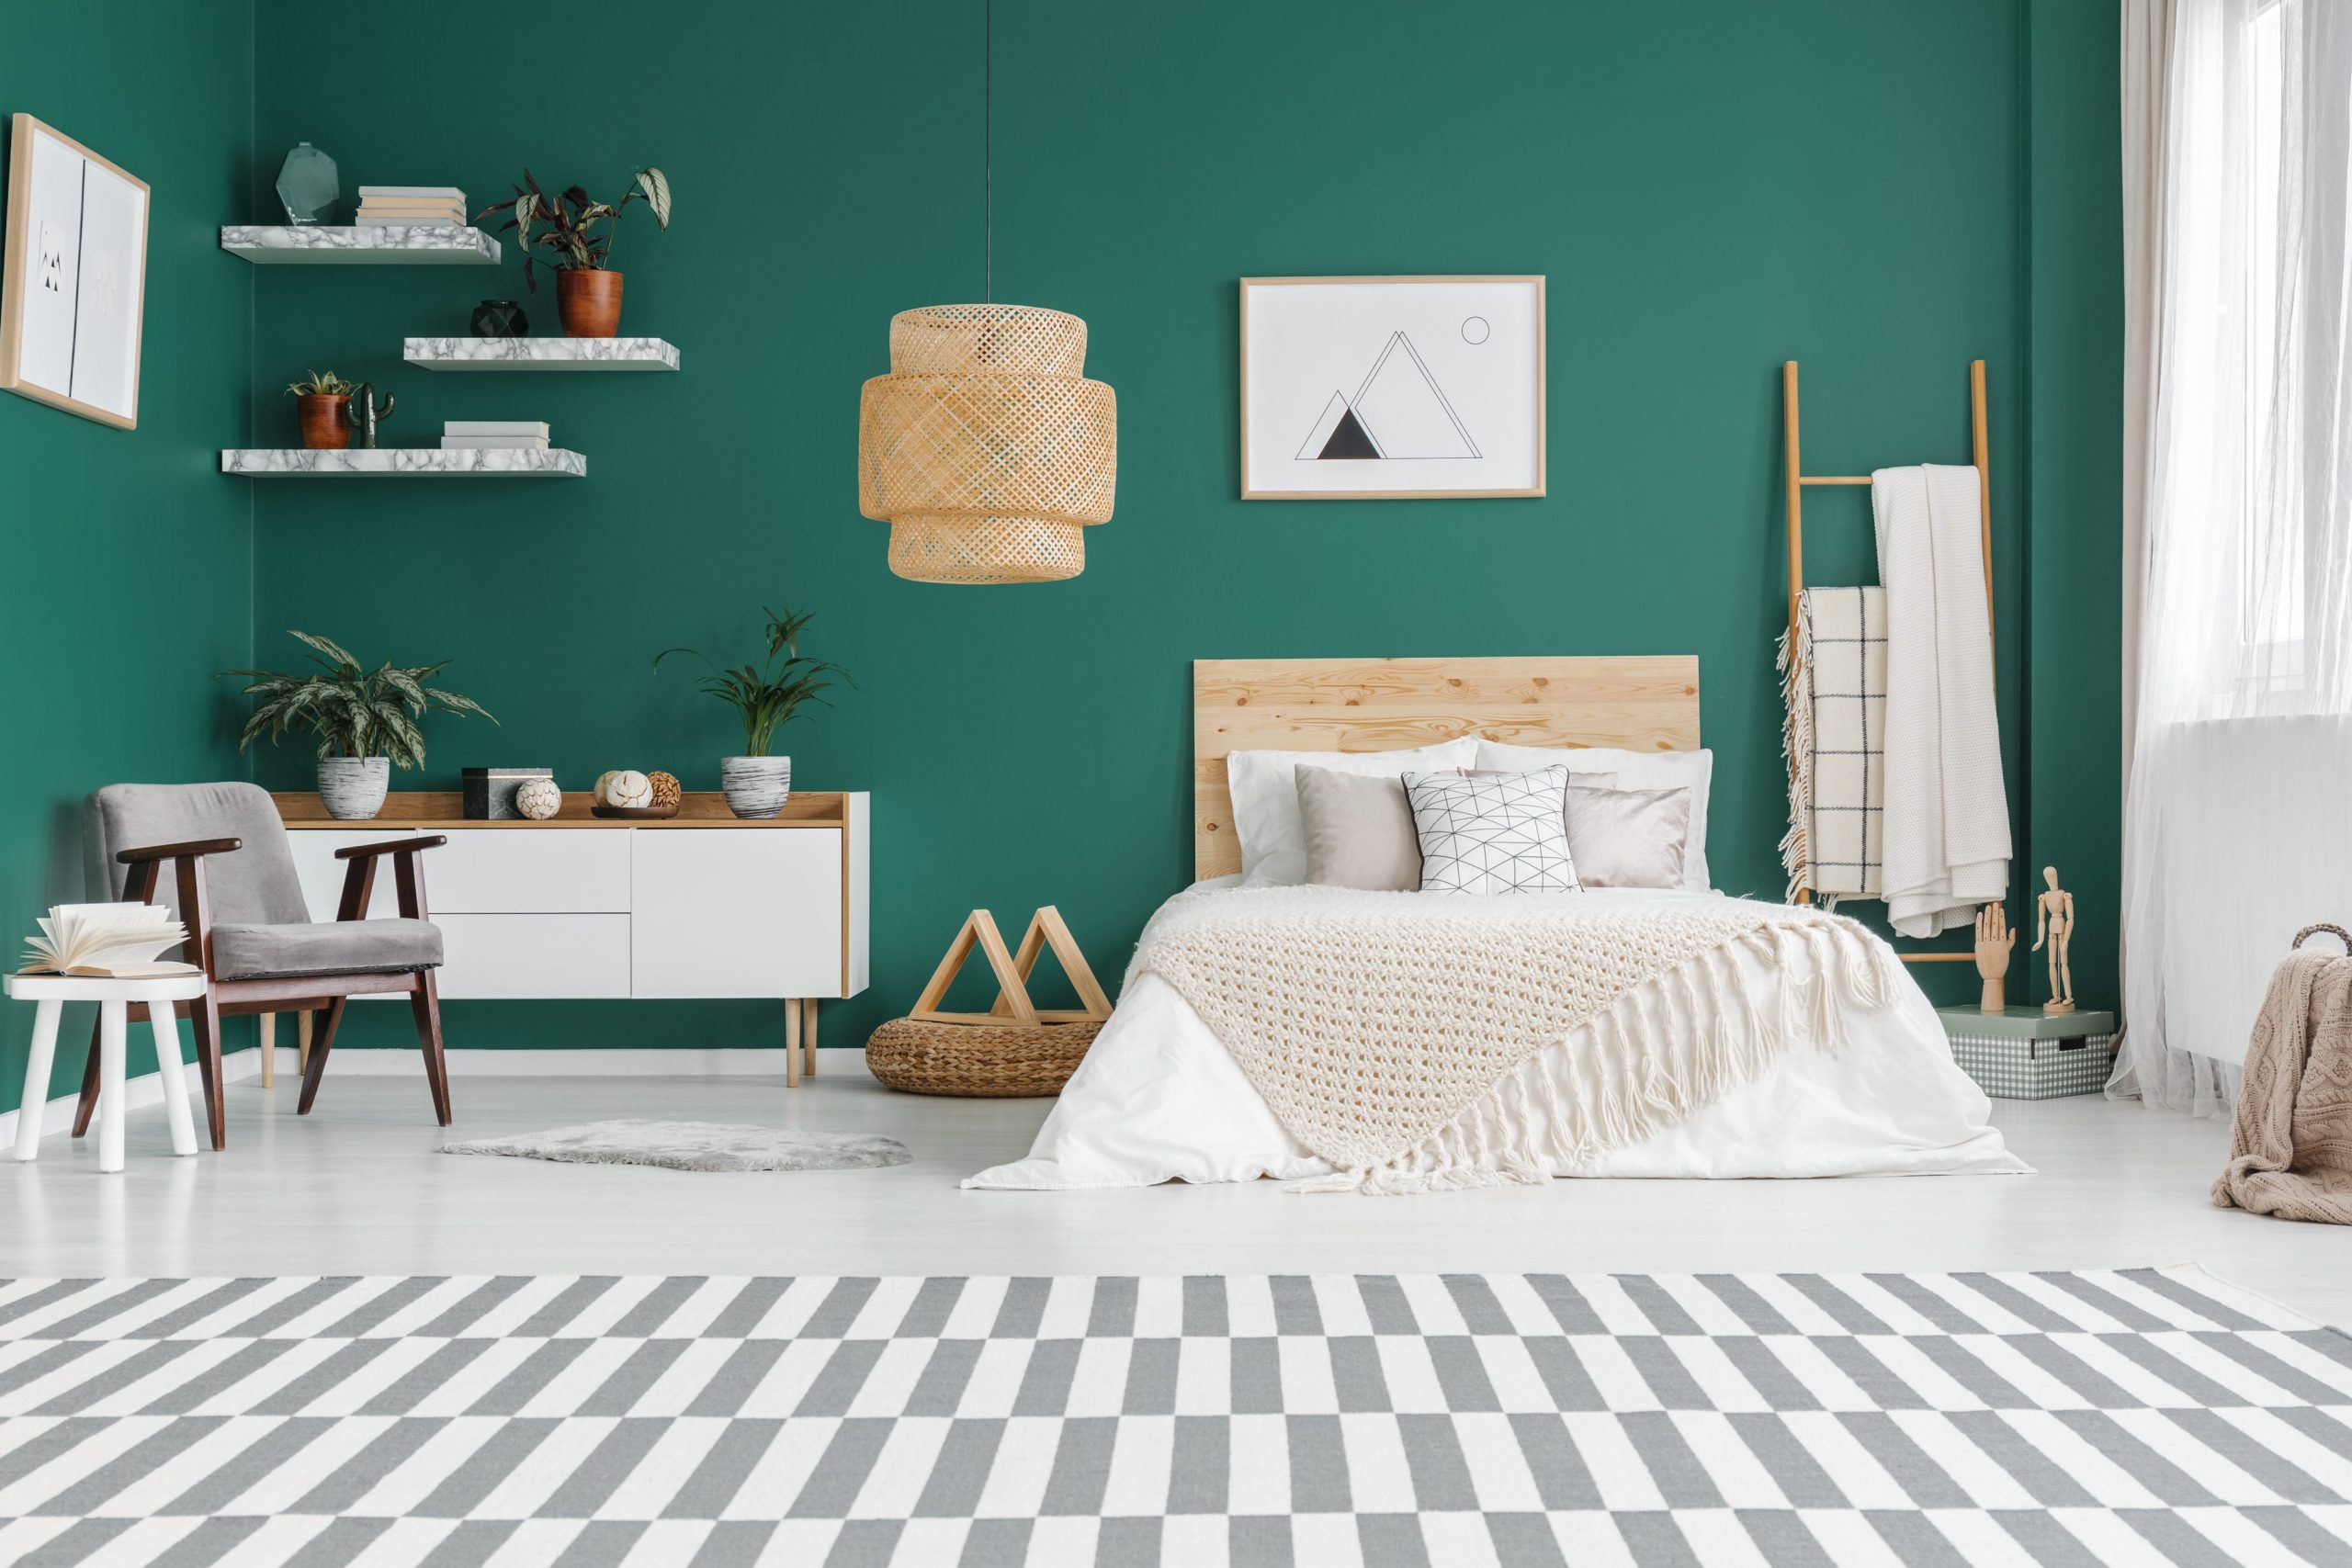 A bedroom with a green wall and checkered floor